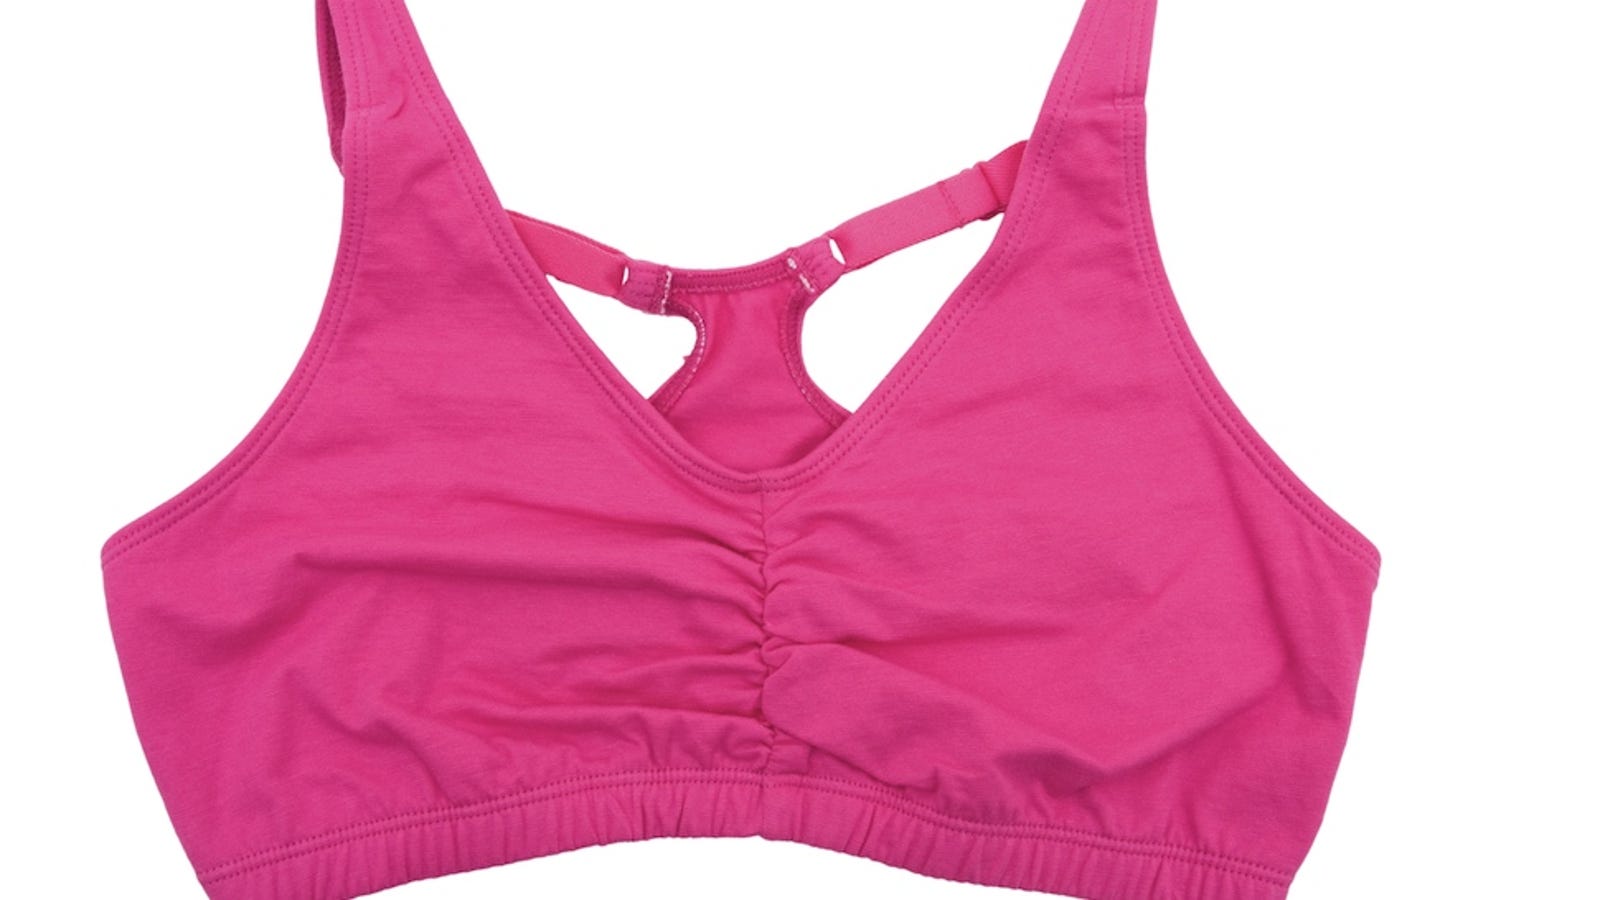 NO-FUN BAGS: Are Your Breasts Disrupting Your Workouts?